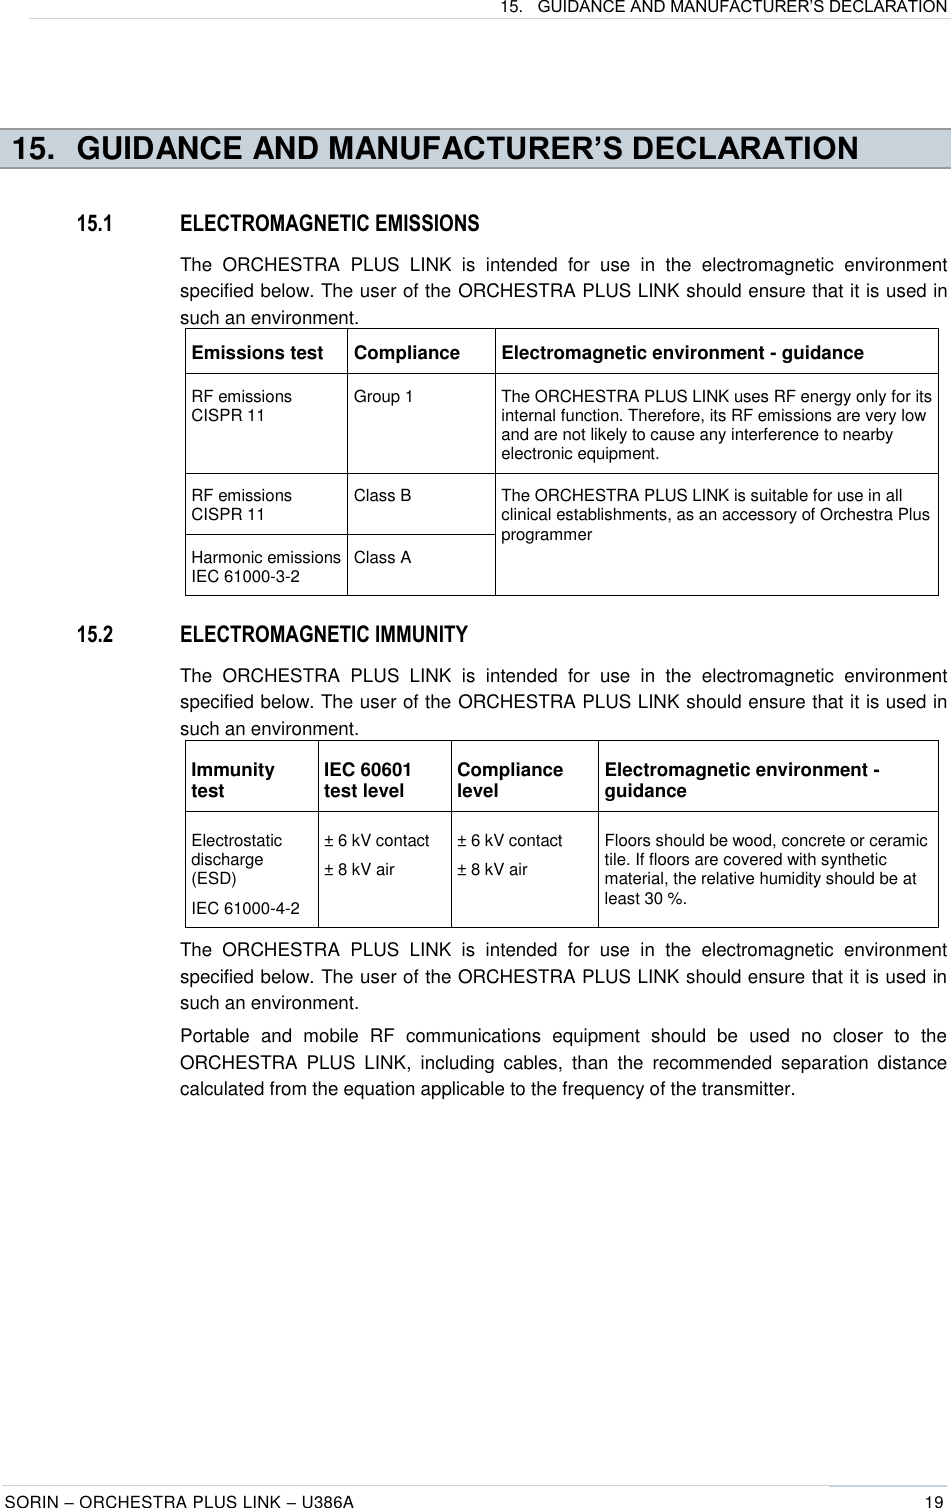 15. GUIDANCE AND MANUFACTURER’S DECLARATION  SORIN – ORCHESTRA PLUS LINK – U386A 19   15.  GUIDANCE AND MANUFACTURER’S DECLARATION  15.1 ELECTROMAGNETIC EMISSIONS The  ORCHESTRA  PLUS  LINK  is  intended  for  use  in  the  electromagnetic  environment specified below. The user of the ORCHESTRA PLUS LINK should ensure that it is used in such an environment. Emissions test Compliance Electromagnetic environment - guidance RF emissions CISPR 11 Group 1 The ORCHESTRA PLUS LINK uses RF energy only for its internal function. Therefore, its RF emissions are very low and are not likely to cause any interference to nearby electronic equipment. RF emissions CISPR 11 Class B The ORCHESTRA PLUS LINK is suitable for use in all clinical establishments, as an accessory of Orchestra Plus programmer Harmonic emissions IEC 61000-3-2 Class A 15.2 ELECTROMAGNETIC IMMUNITY The  ORCHESTRA  PLUS  LINK  is  intended  for  use  in  the  electromagnetic  environment specified below. The user of the ORCHESTRA PLUS LINK should ensure that it is used in such an environment. Immunity test IEC 60601 test level Compliance level Electromagnetic environment - guidance Electrostatic discharge (ESD) IEC 61000-4-2 ± 6 kV contact ± 8 kV air ± 6 kV contact ± 8 kV air Floors should be wood, concrete or ceramic tile. If floors are covered with synthetic material, the relative humidity should be at least 30 %. The  ORCHESTRA  PLUS  LINK  is  intended  for  use  in  the  electromagnetic  environment specified below. The user of the ORCHESTRA PLUS LINK should ensure that it is used in such an environment. Portable  and  mobile  RF  communications  equipment  should  be  used  no  closer  to  the ORCHESTRA  PLUS  LINK,  including  cables,  than  the  recommended  separation  distance calculated from the equation applicable to the frequency of the transmitter. 